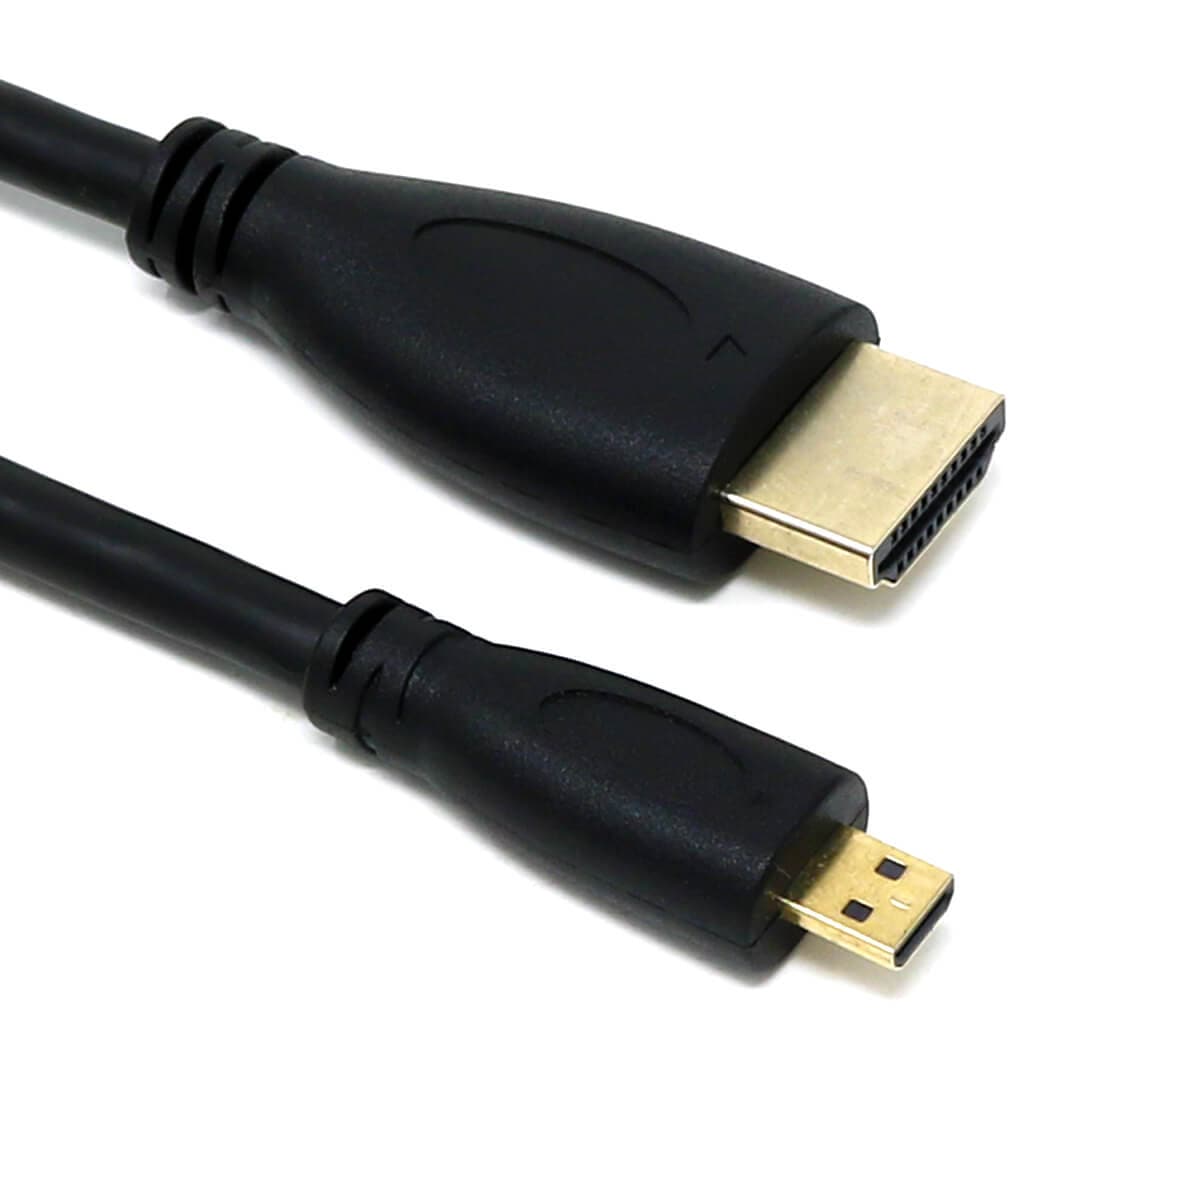 HDMI to HDMI Cable for Raspberry | The Hut